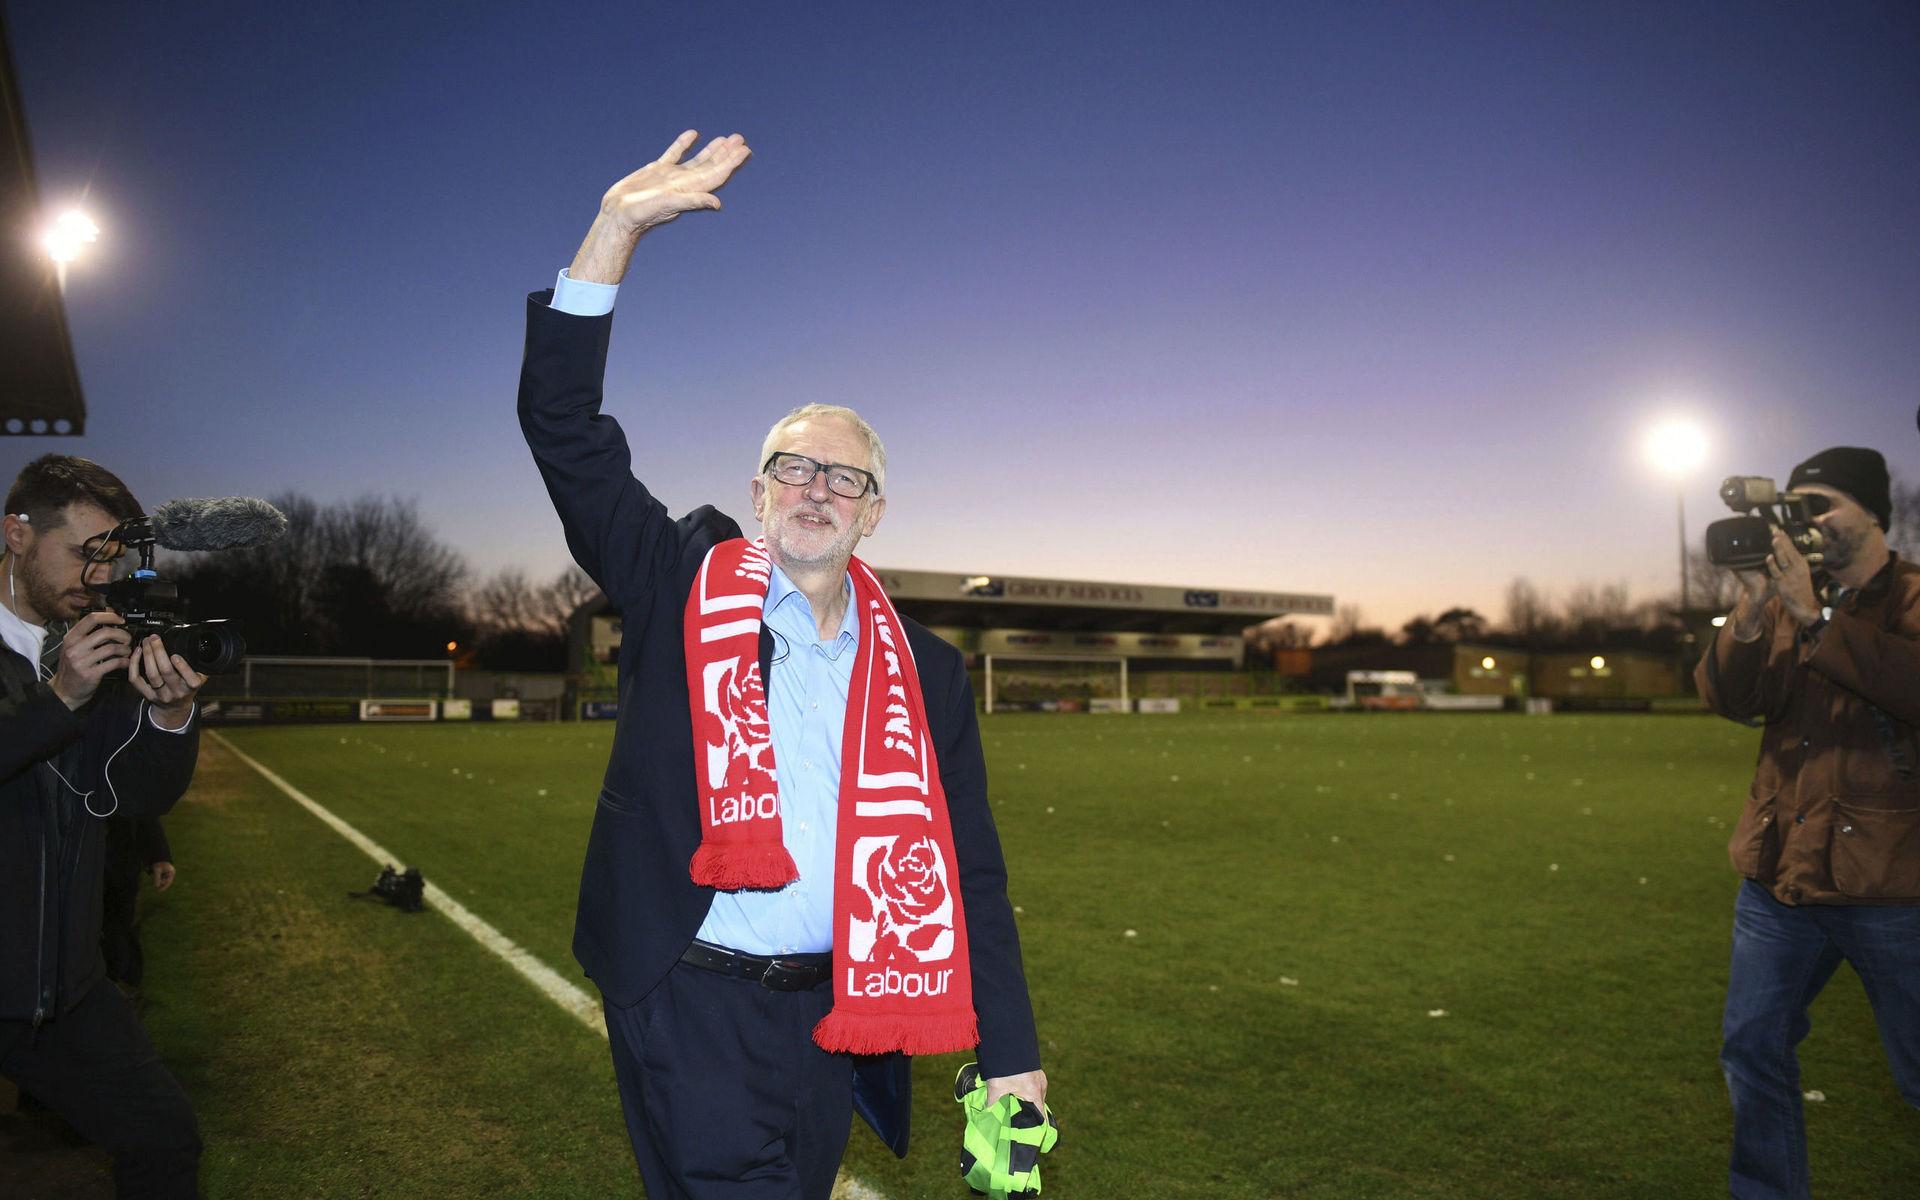 Britain&apos;s main opposition Labour Party leader Jeremy Corbyn at Forest Green Rovers soccer club, that competes in League Two, the fourth tier of English football, while on the General Election campaign trail in Nailsworth, England, Monday Dec. 9, 2019.  The UK is preparing to go to the polls in a General Election on Dec. 12. (Joe Giddens/PA via AP)  LRC816